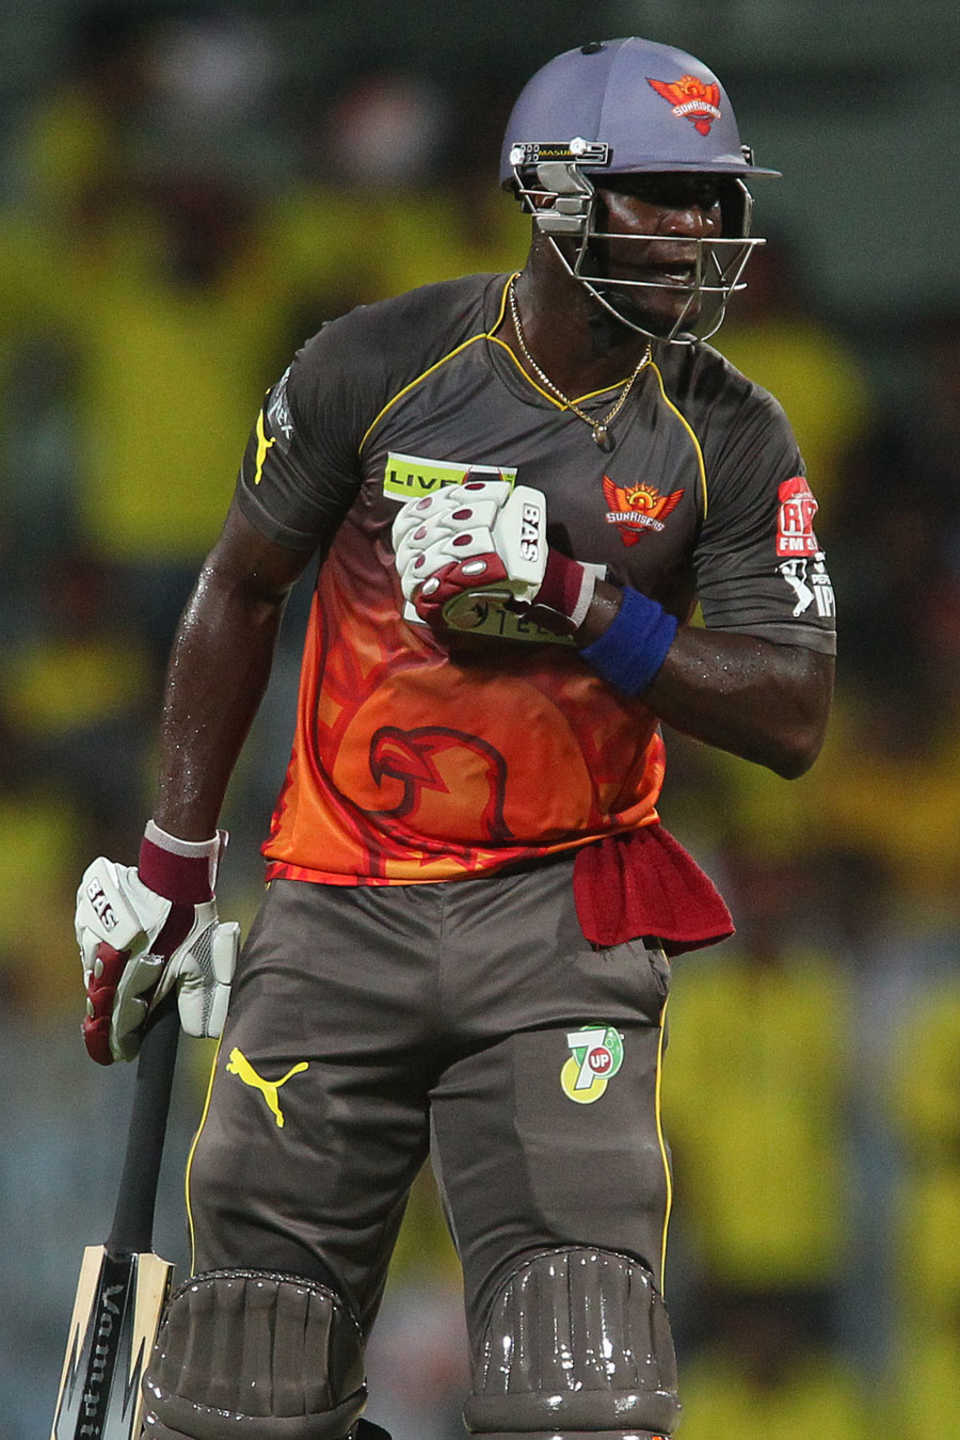 'I believed we were operating from brotherly love. I still believe that. That's why it's important to have a conversation' - Daren Sammy on his time with Sunrisers Hyderabad, Chennai Super Kings v Sunrisers Hyderabad, IPL, Chennai, April 25, 2013